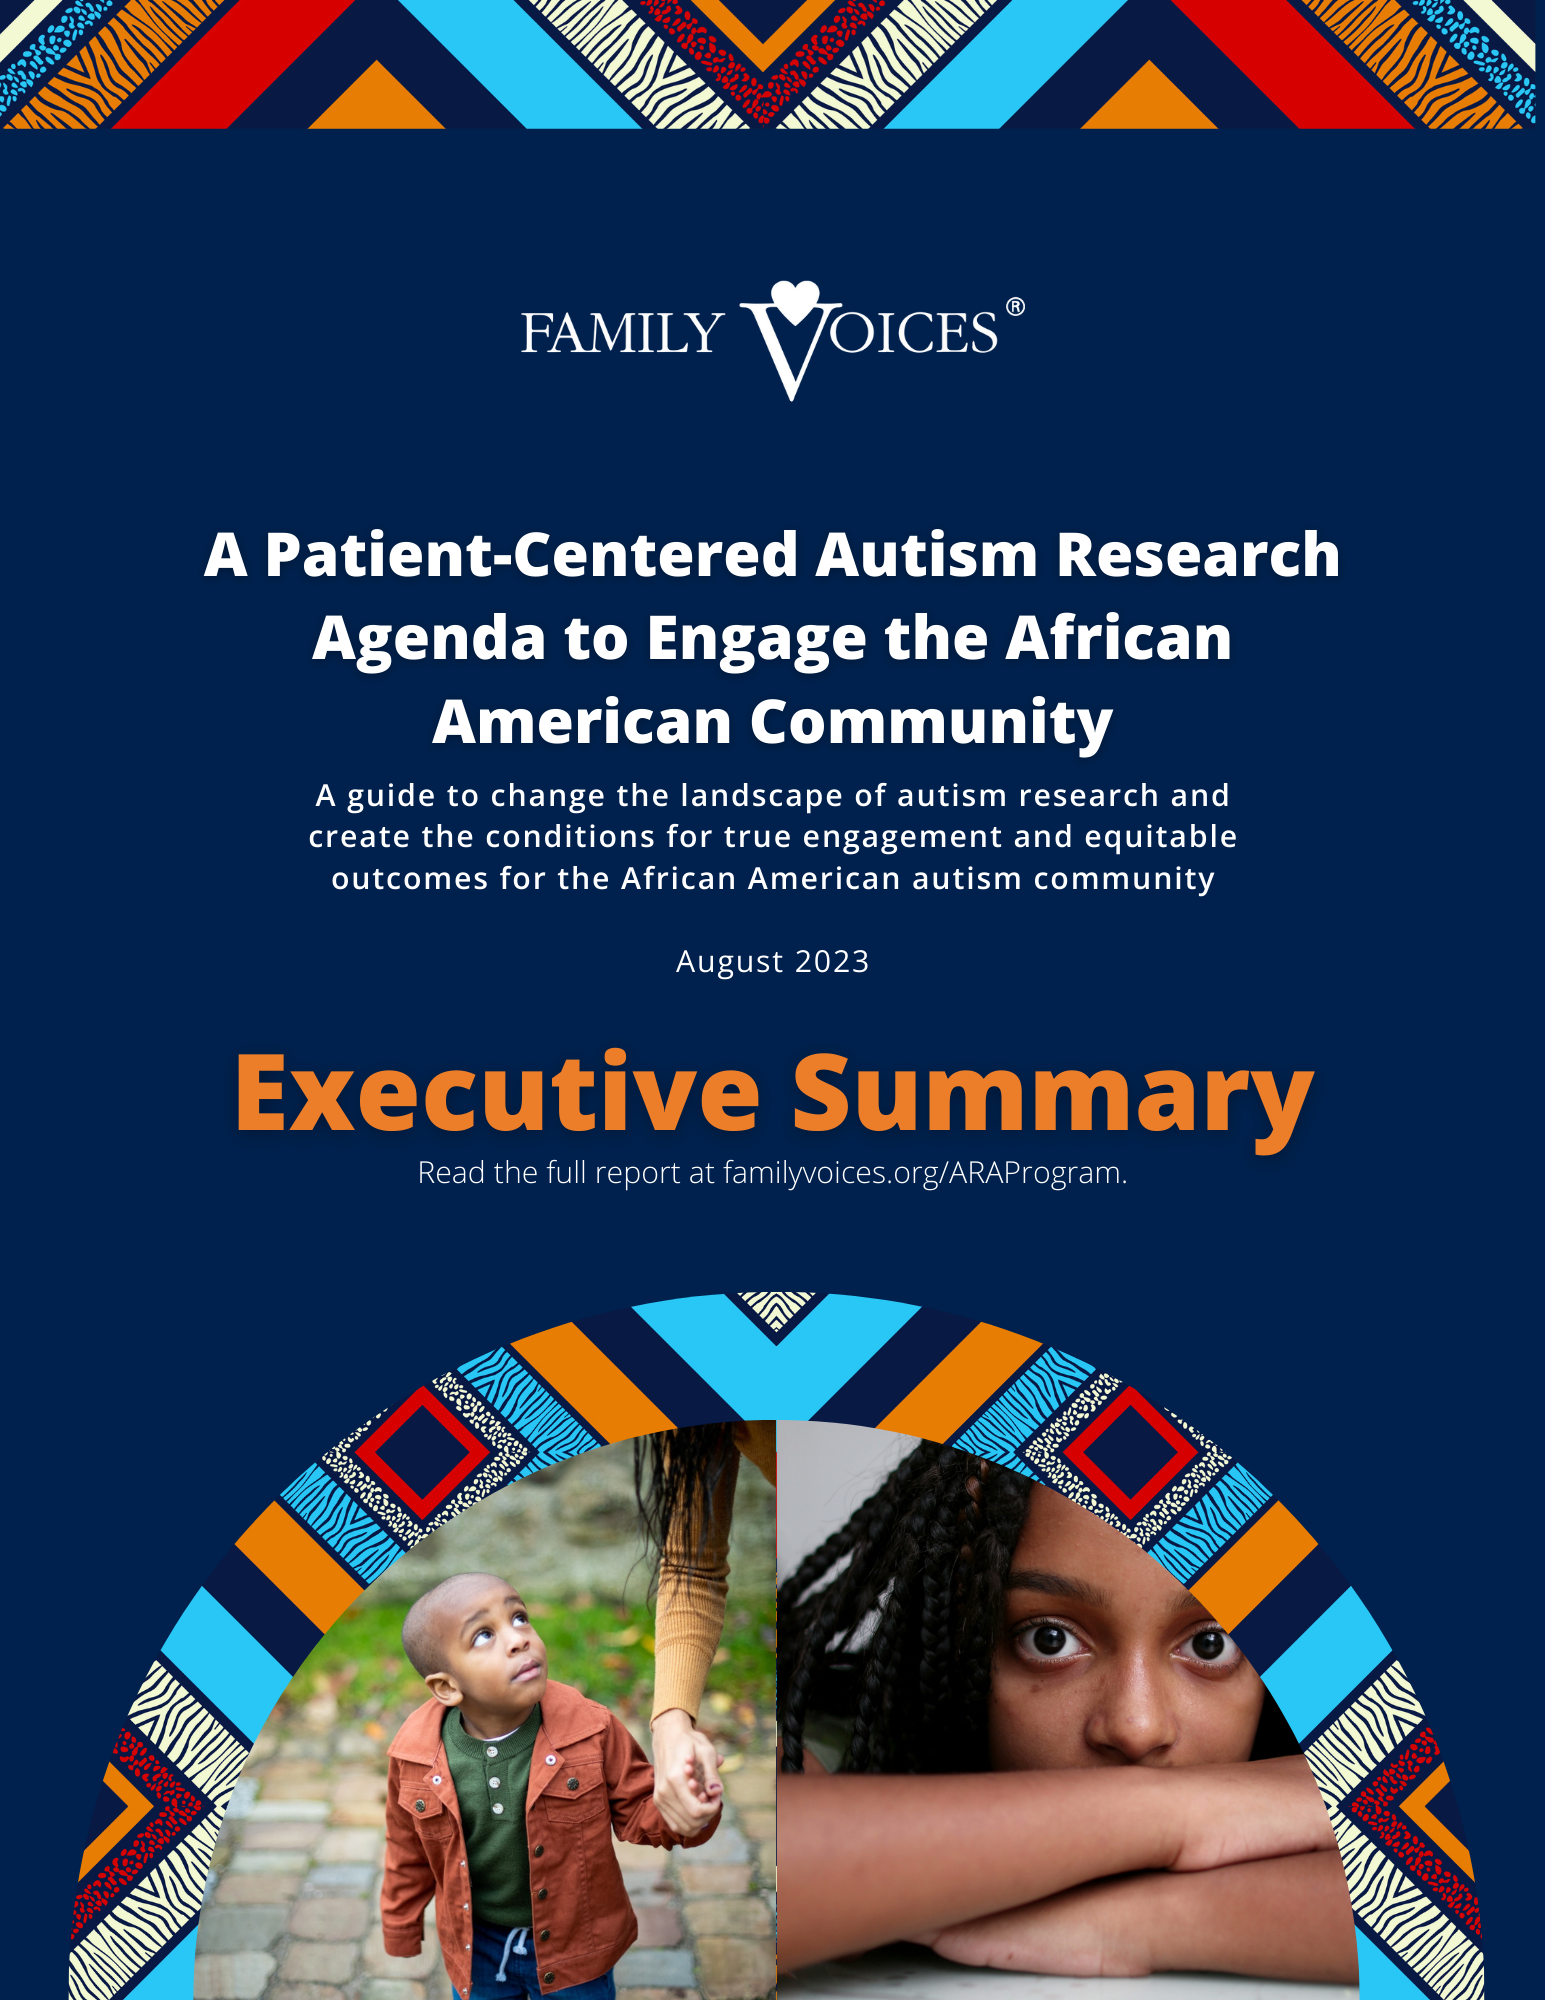 Cover of the executive summary, with bright colorful patterns and images of children of various ages.